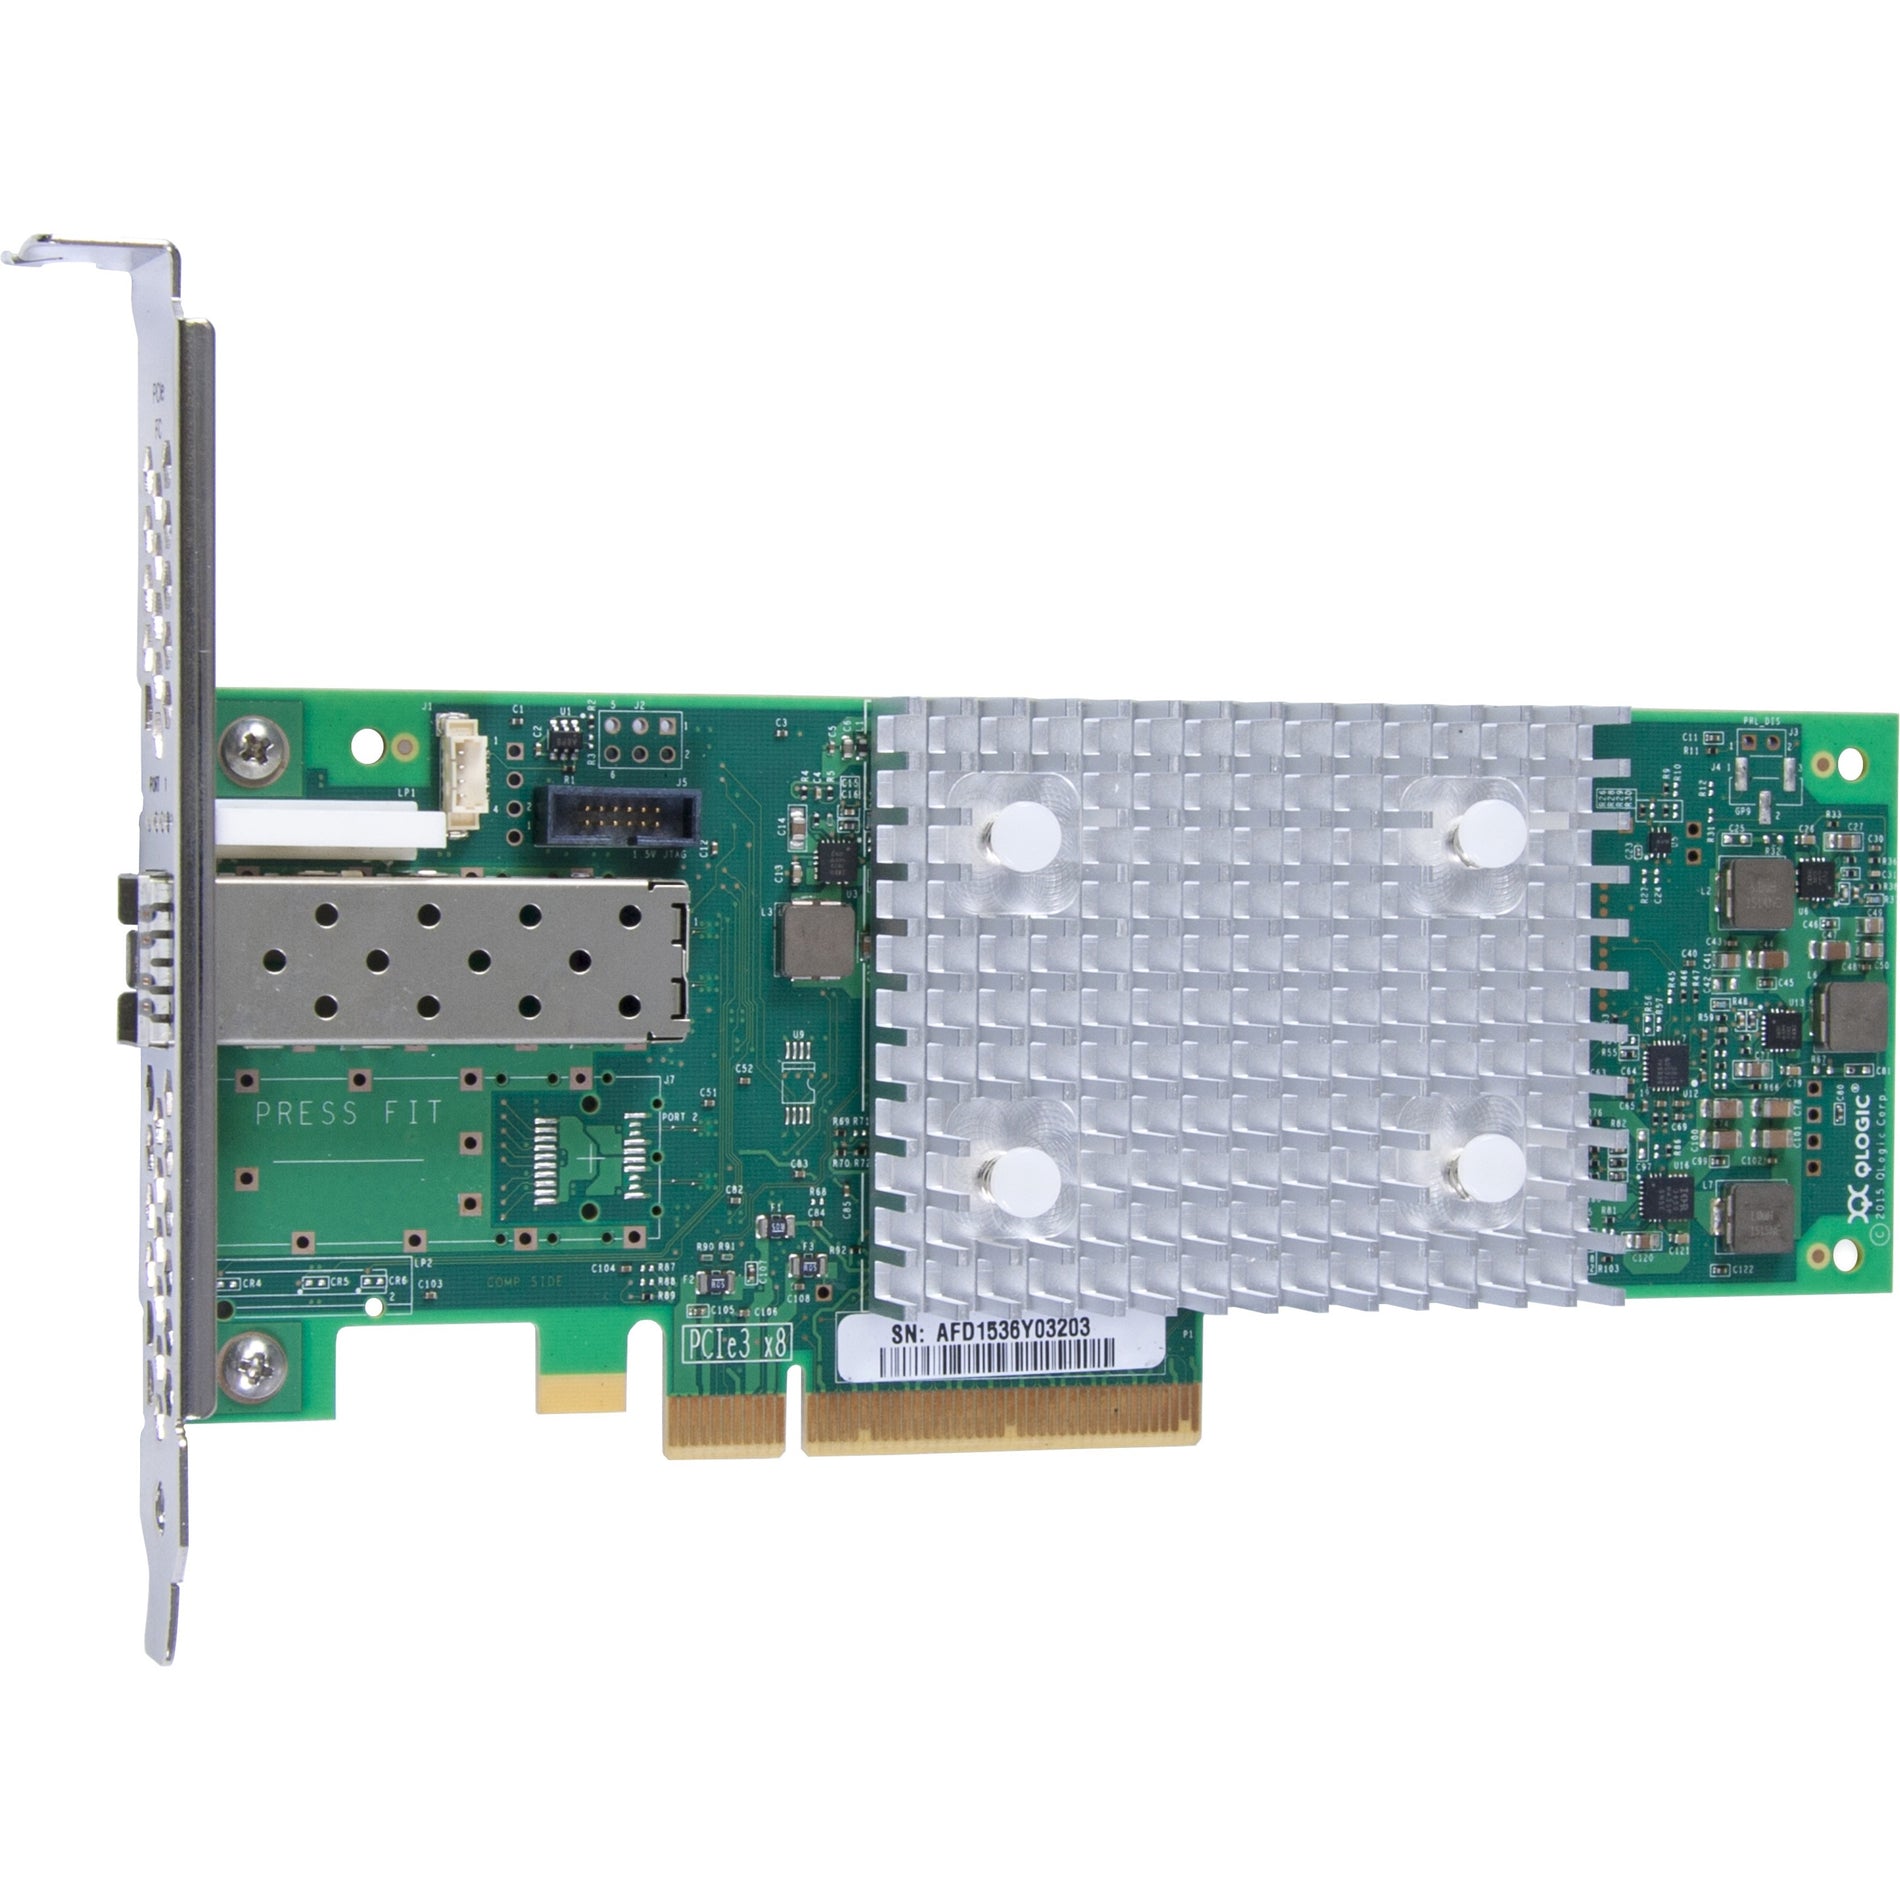 HPE P9M75A StoreFabric SN1600Q 32Gb Single Port Fibre Channel HBA, High-Speed Data Transfer for Enhanced Performance [Discontinued]